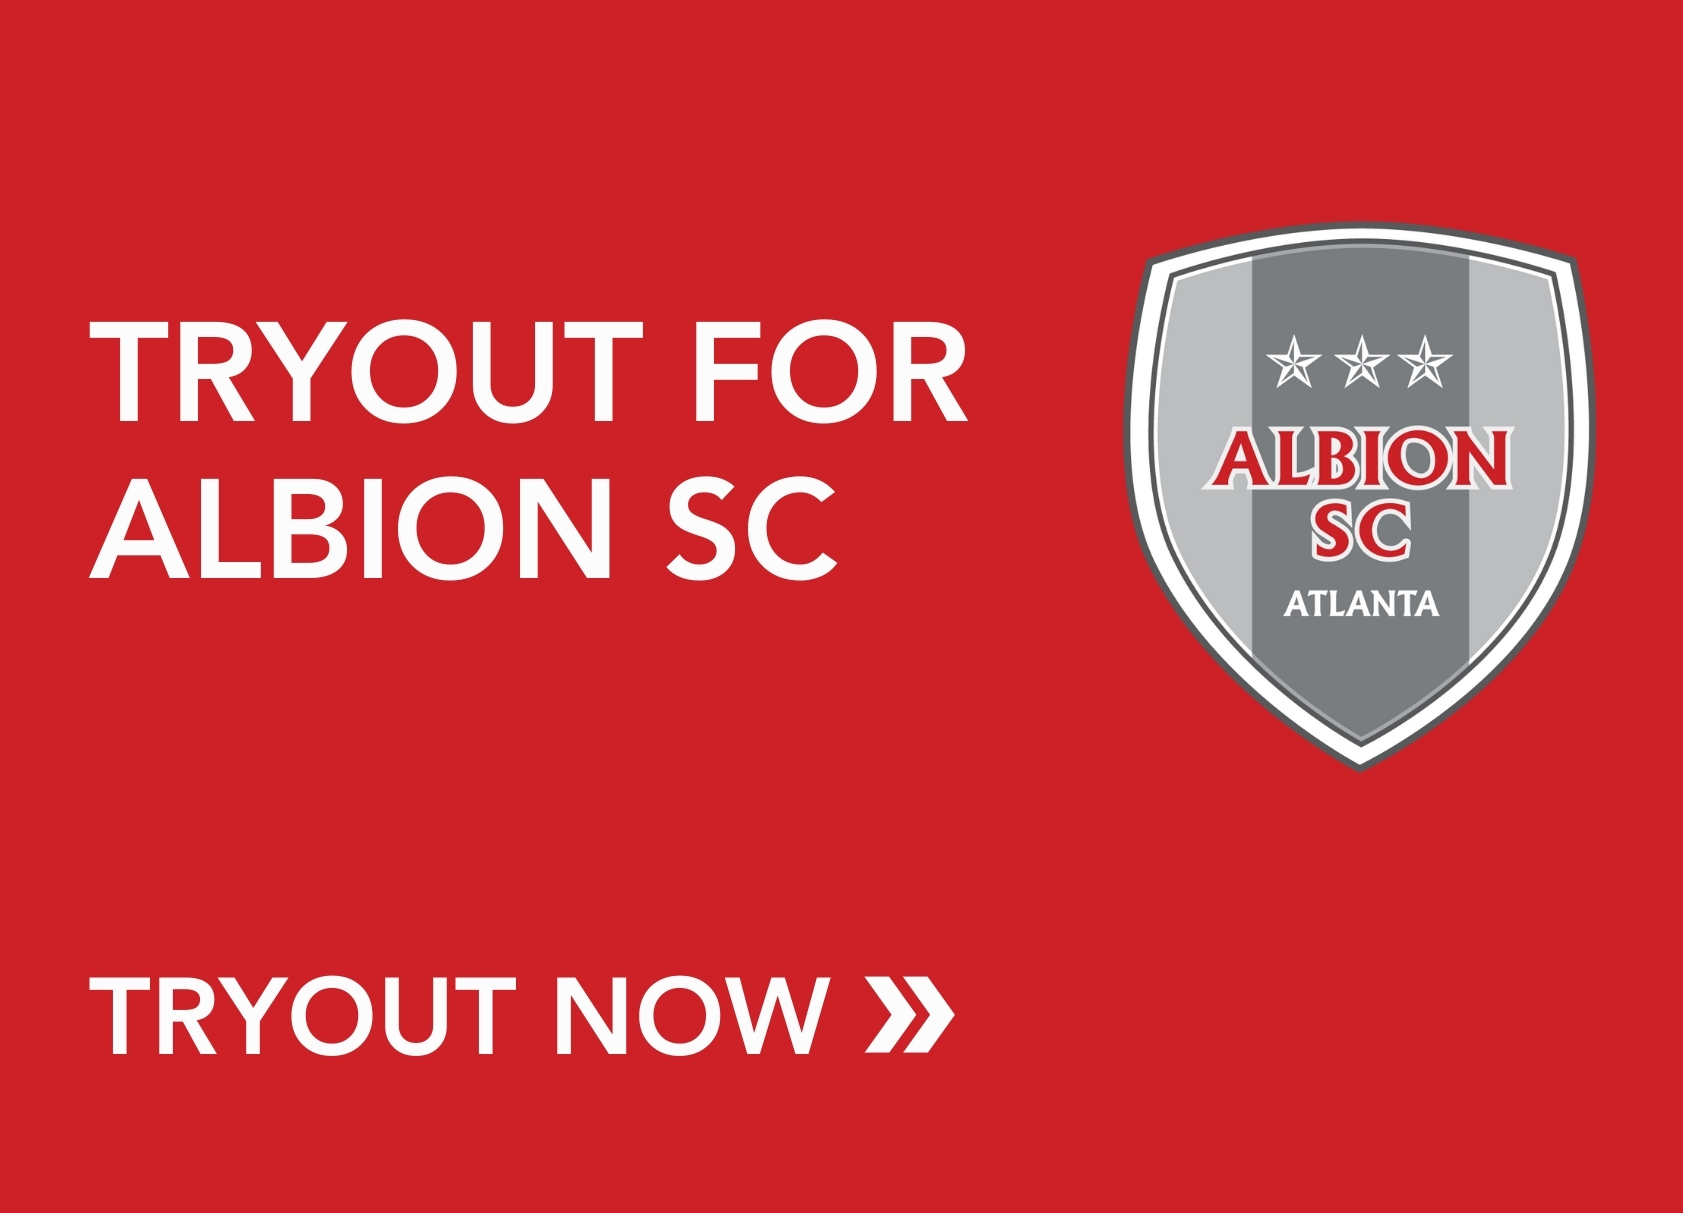 Tryout for Albion